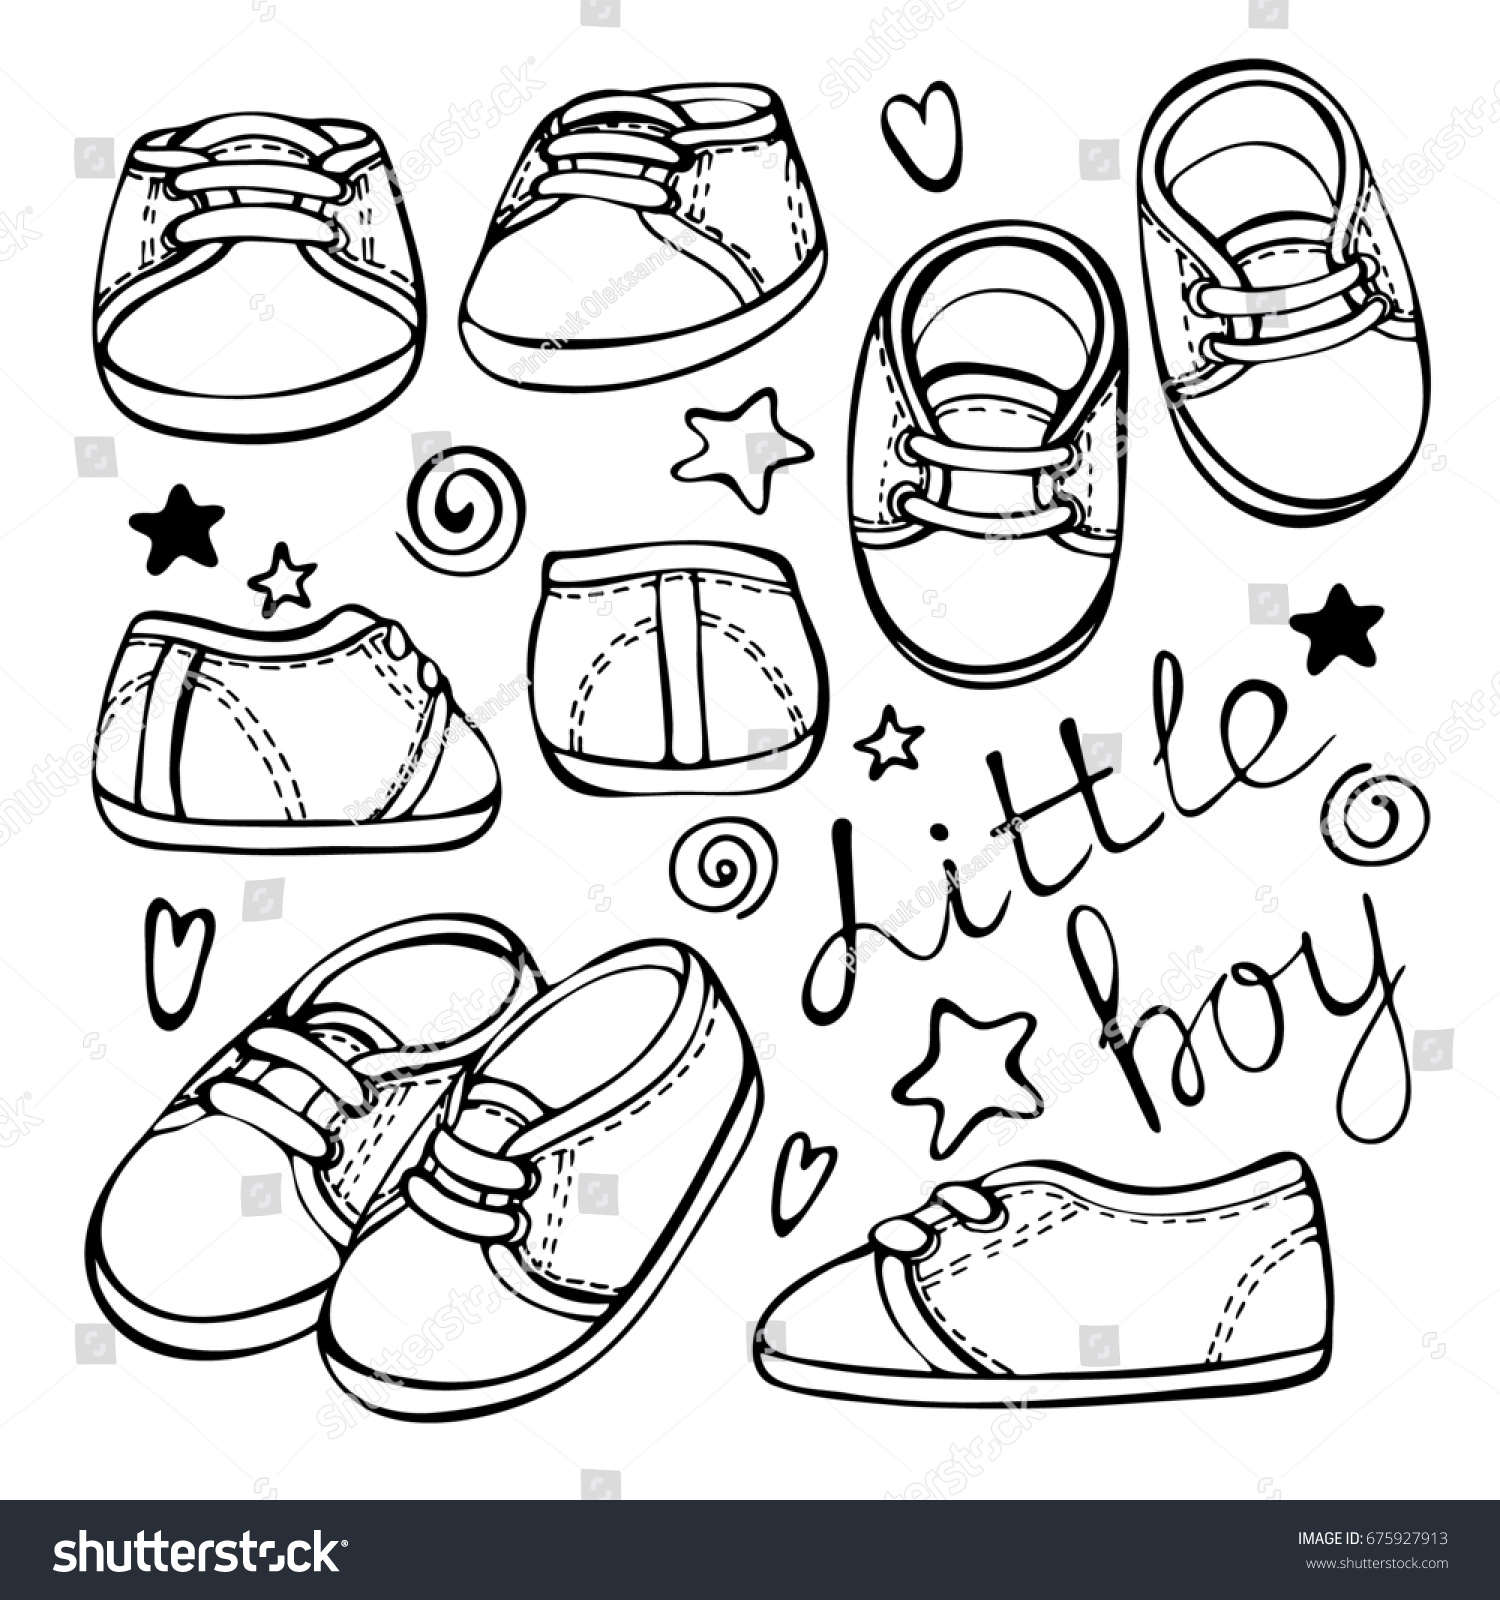 Baby Fashion Shoes Sketch Hand Drawn Stock Illustration 675927913 How to draw a pair of shoes. https www shutterstock com image illustration baby fashion shoes sketch hand drawn 675927913